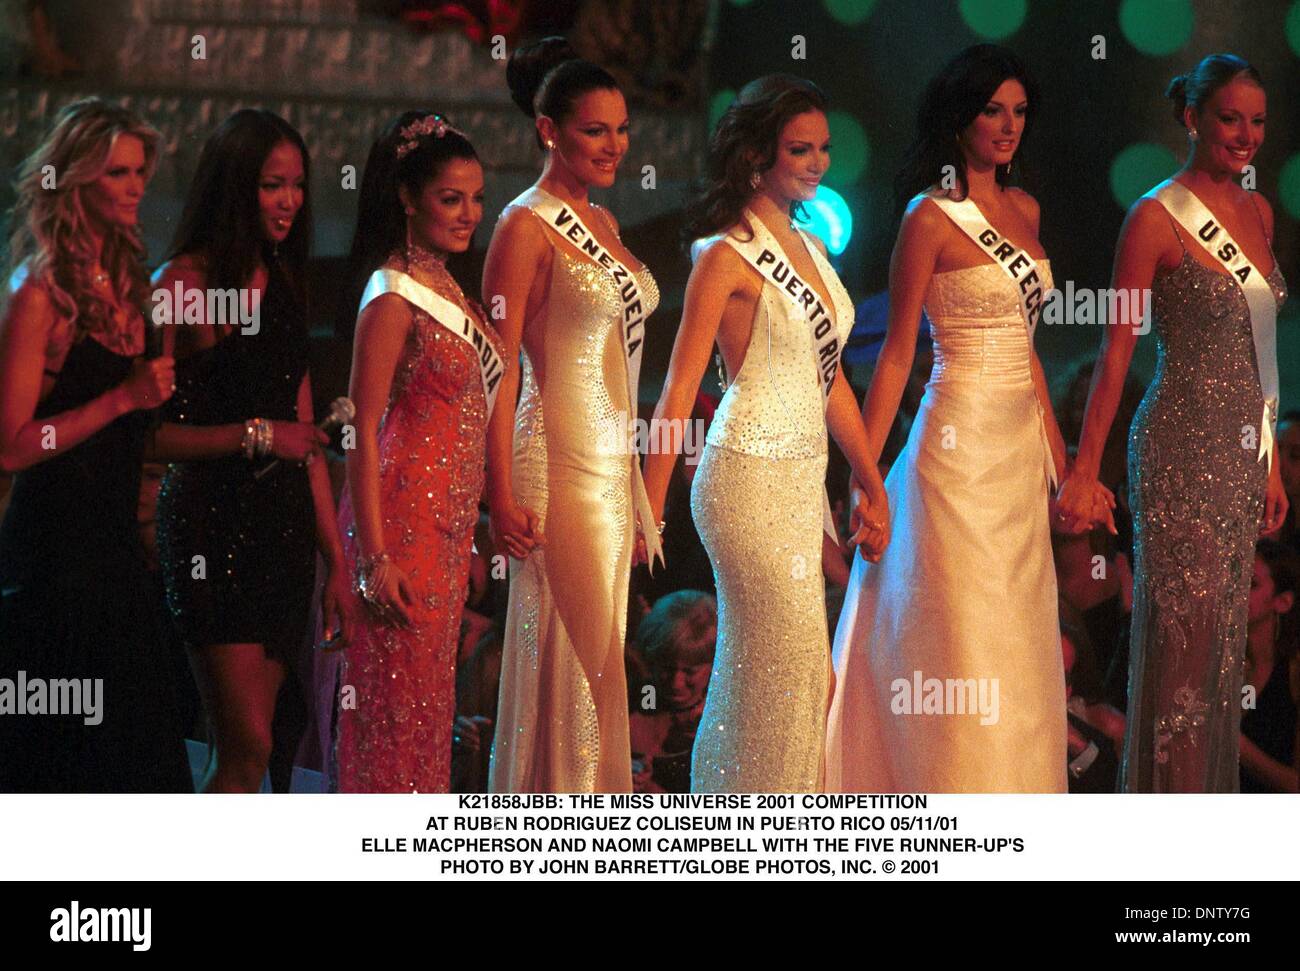 May 11, 2001 - K21858JBB: THE MISS UNIVERSE 2001 COMPETITION.AT RUBEN RODRIGUEZ COLISEUM IN PUERTO RICO 05/11/01.ELLE MACPHERSON AND NAOMI CAMPBELL WITH THE FIVE RUNNER-UP'S. JOHN BARRETT/   2001(Credit Image: © Globe Photos/ZUMAPRESS.com) Stock Photo